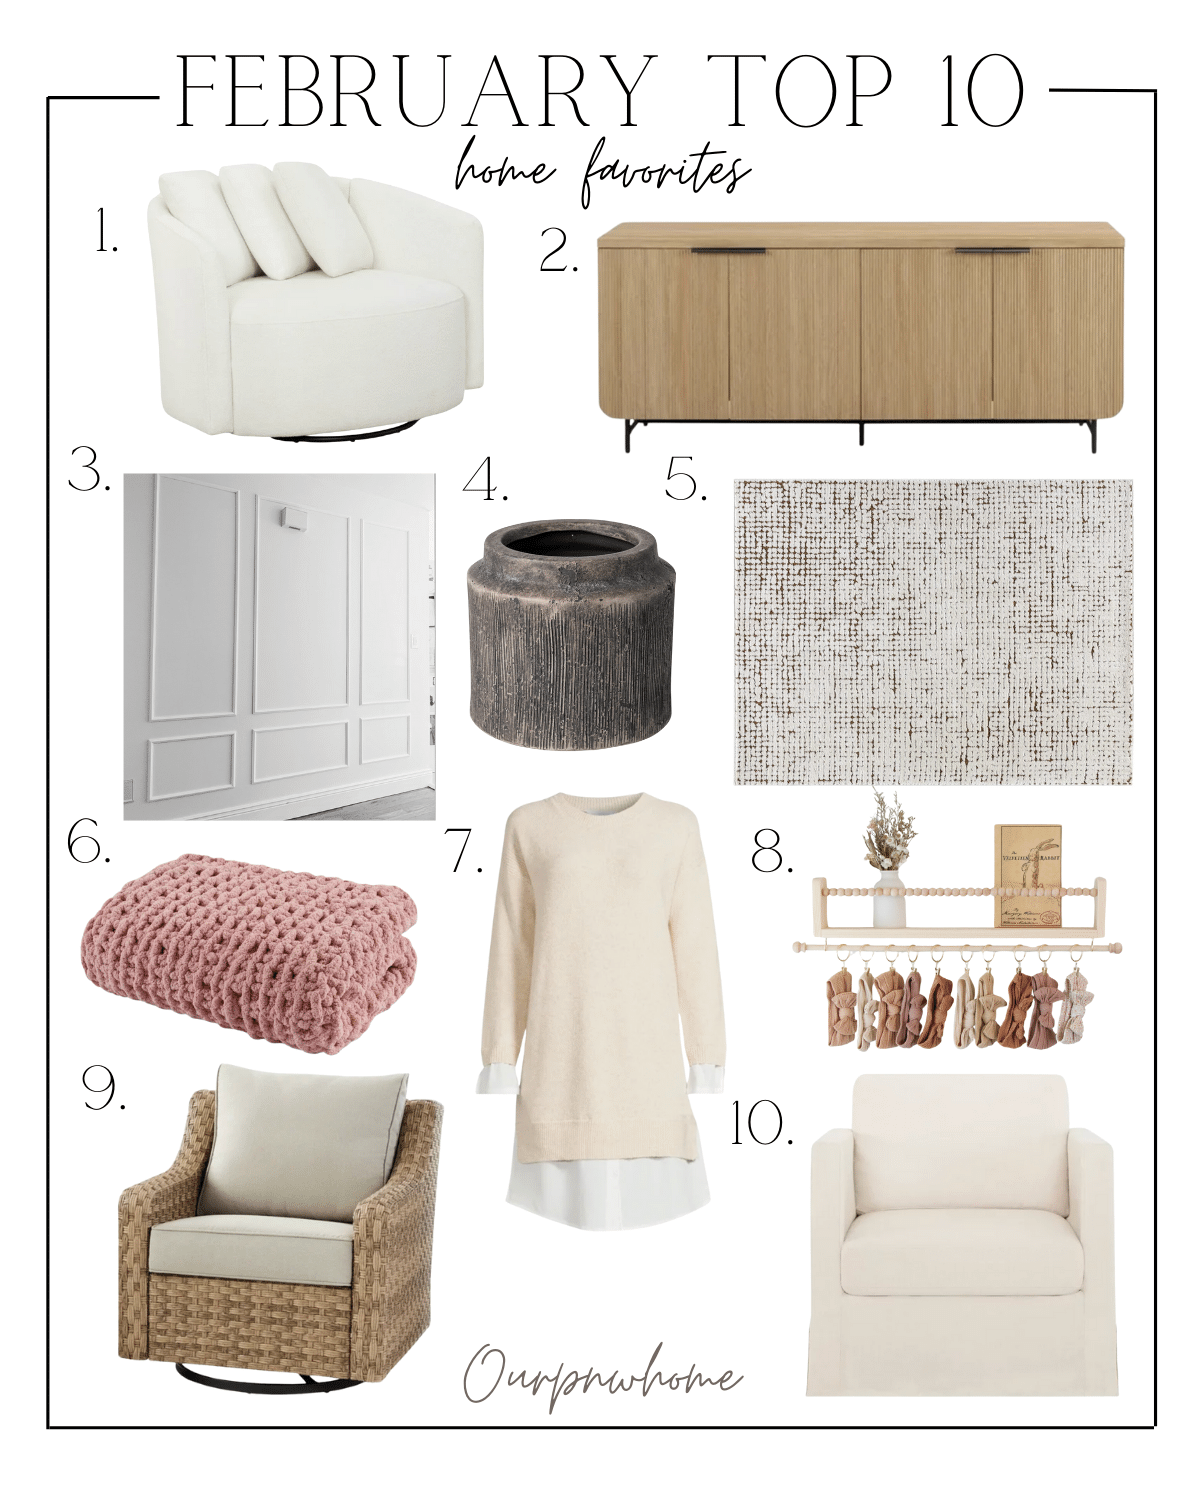 February's favorite home finds | February, monthly top seller, best seller, home, home decor, home finds, home favorites, accent chair, console table, wall trim, planter, area rug, throw blanket, shelf, sweater dress, outdoor, outdoor decor 